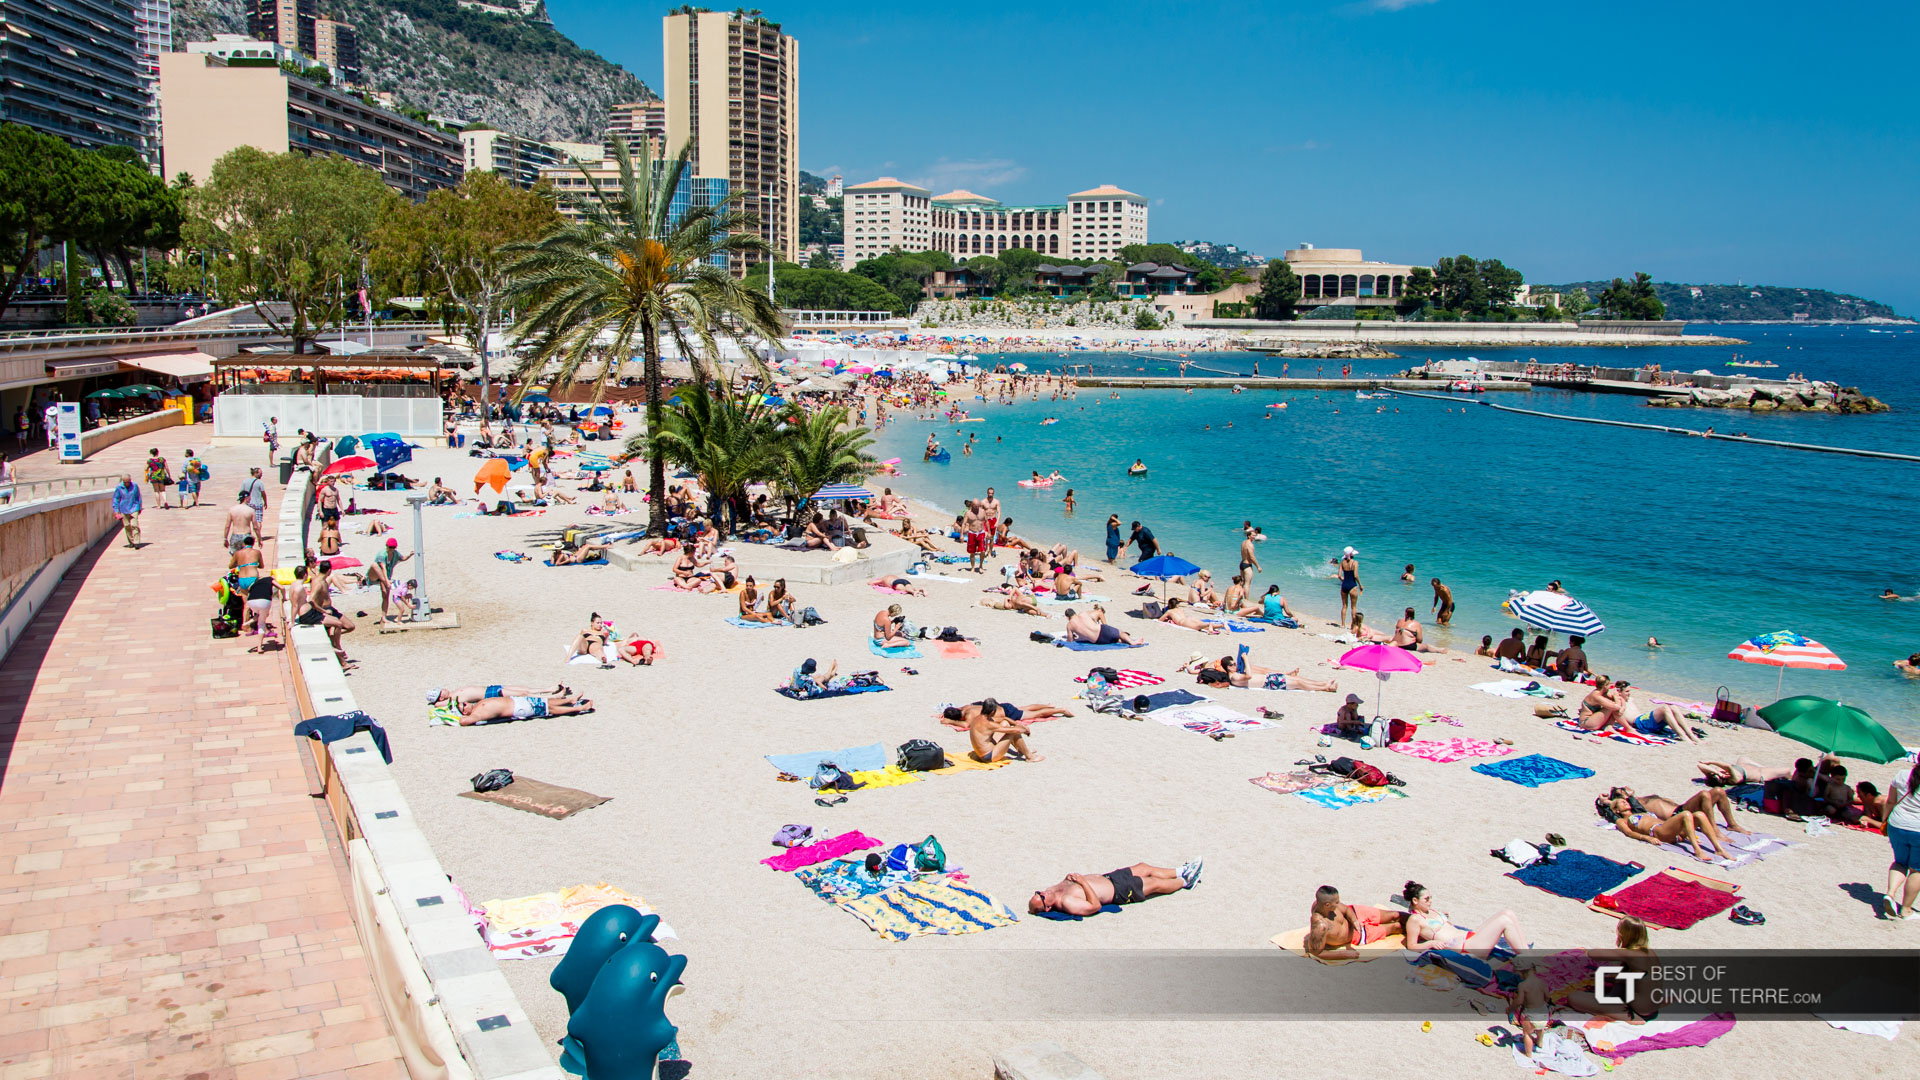 How to Experience Monte Carlo on a Budget - Free and Cheap Things